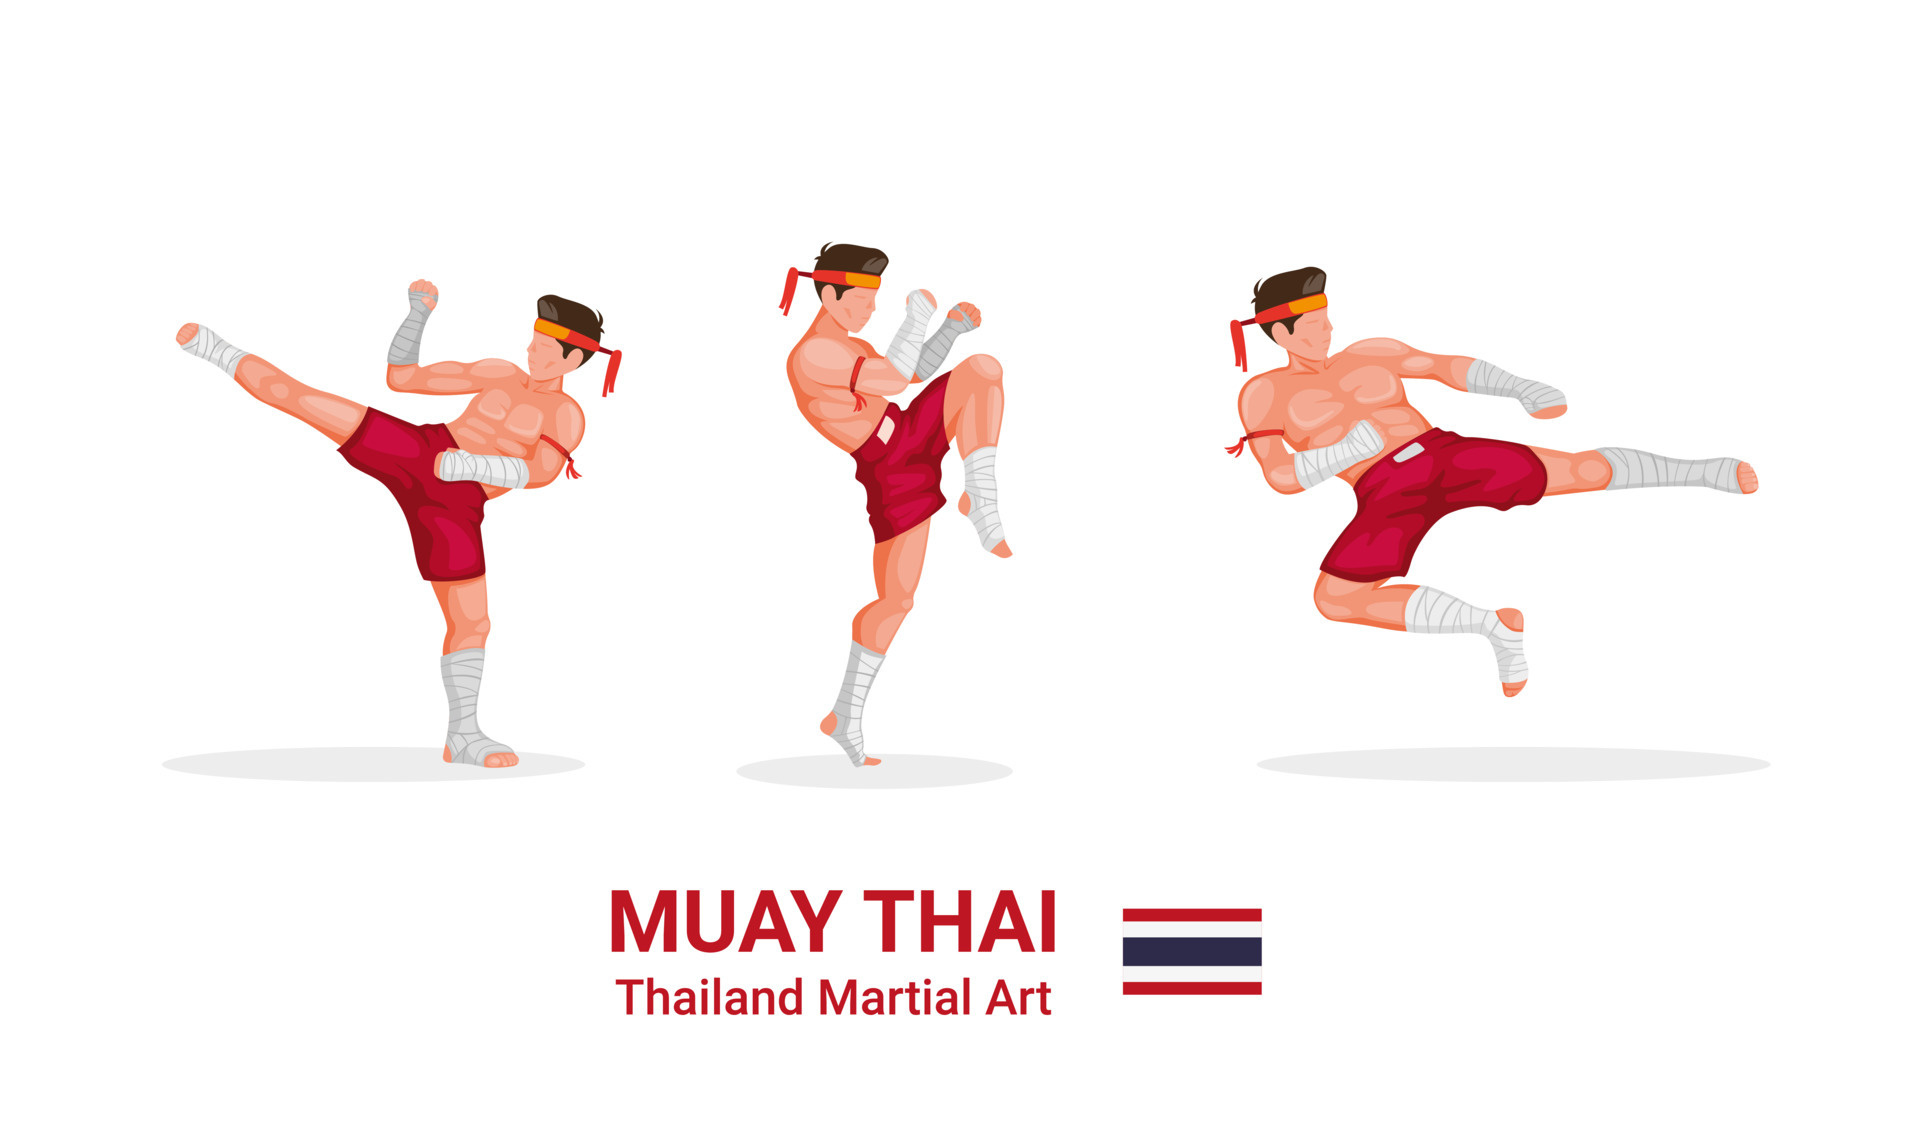 Muay Thai: Thai boxing poster, A combat sport that uses stand-up striking along with various clinching techniques. 1920x1140 HD Wallpaper.